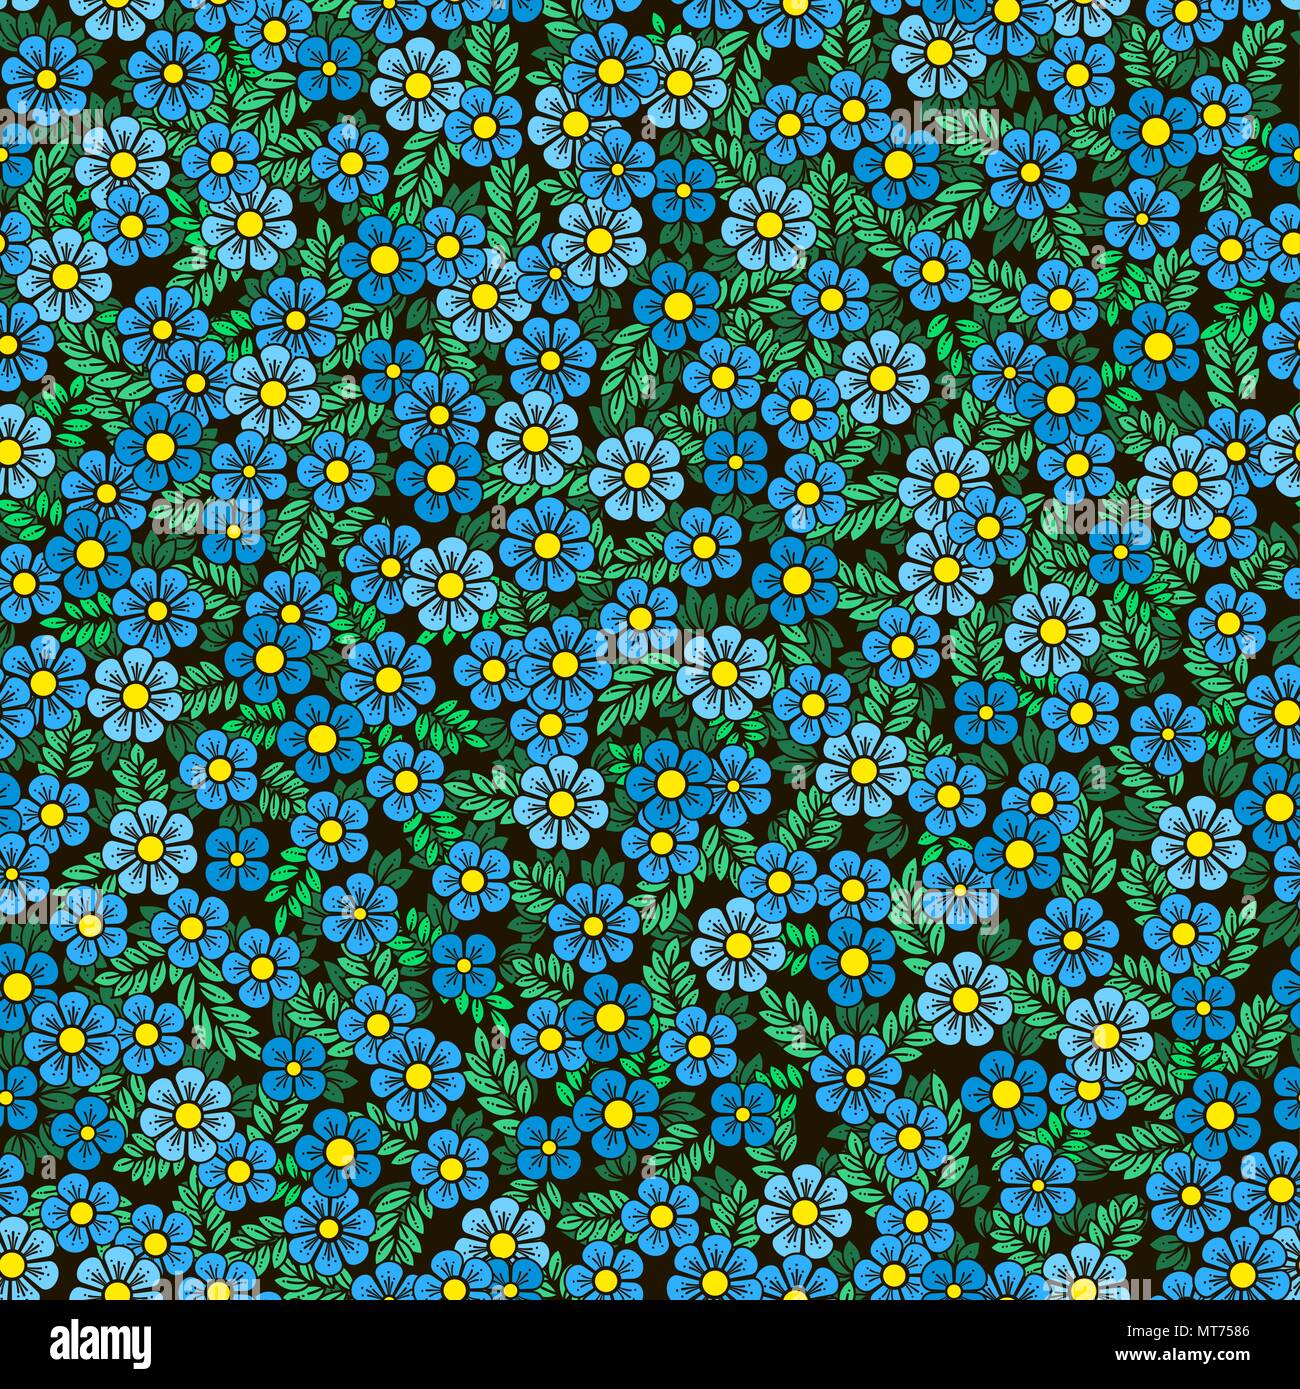 Flower pattern. Small blue flowers and leaves on a dark background. Can be used on textiles ло Stock Vector